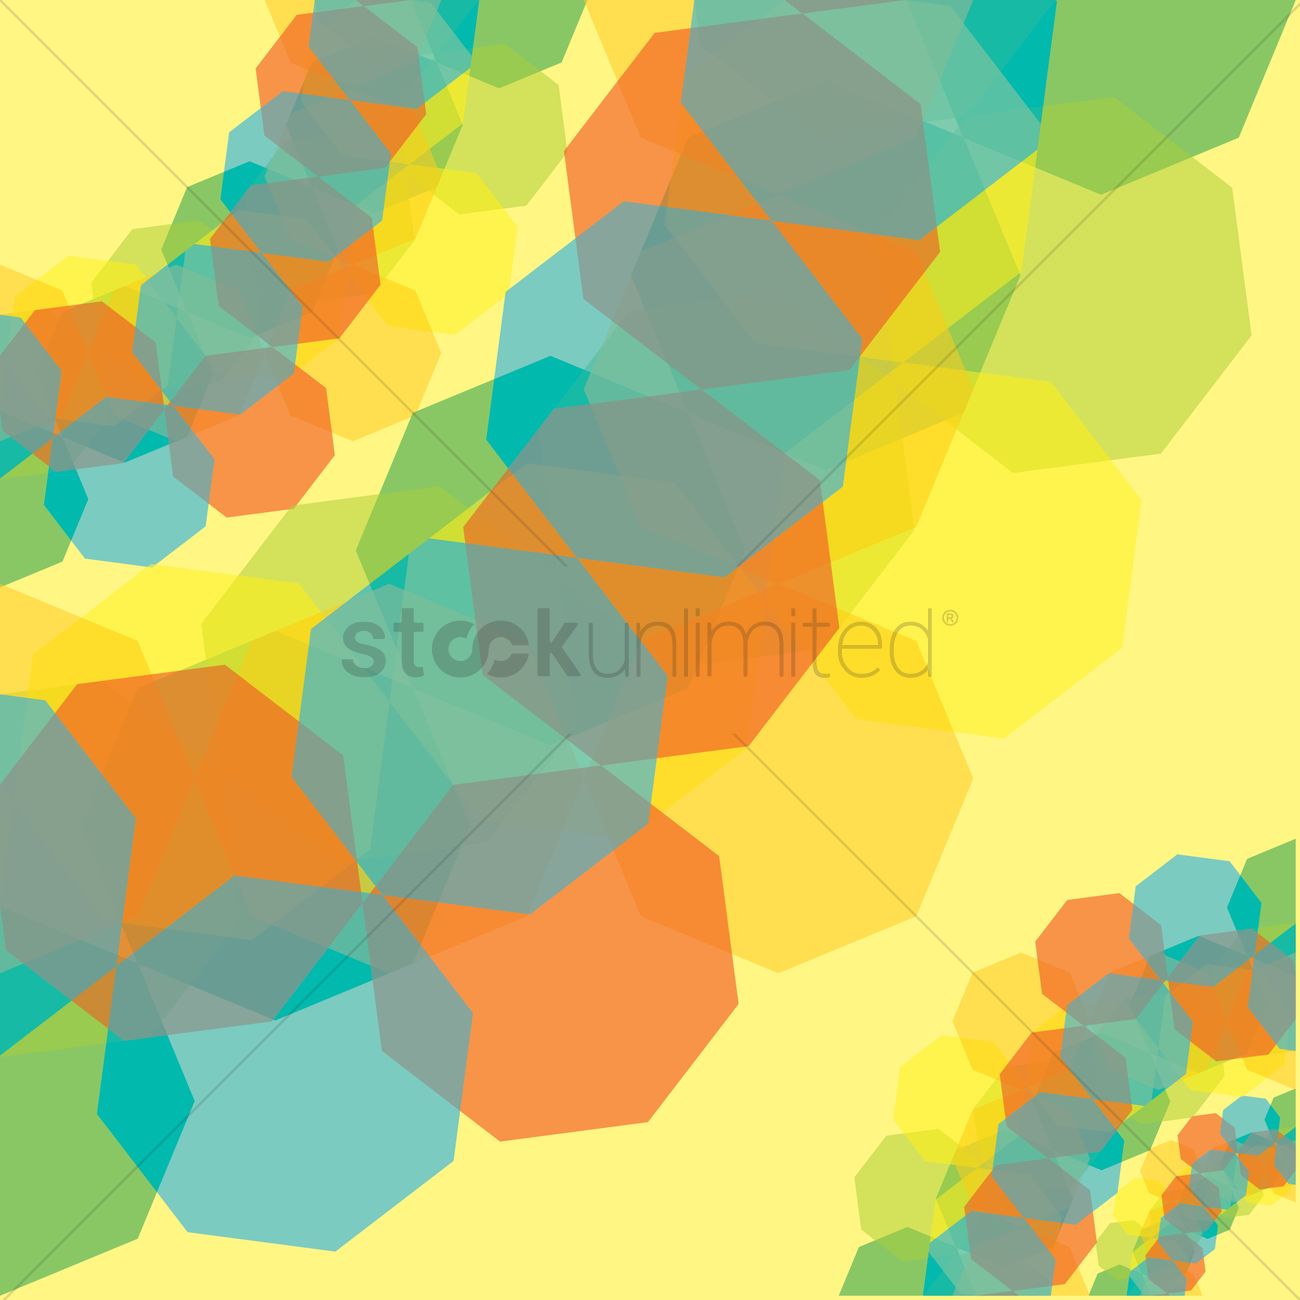 Octagon Abstract Background Vector Image Stockunlimited